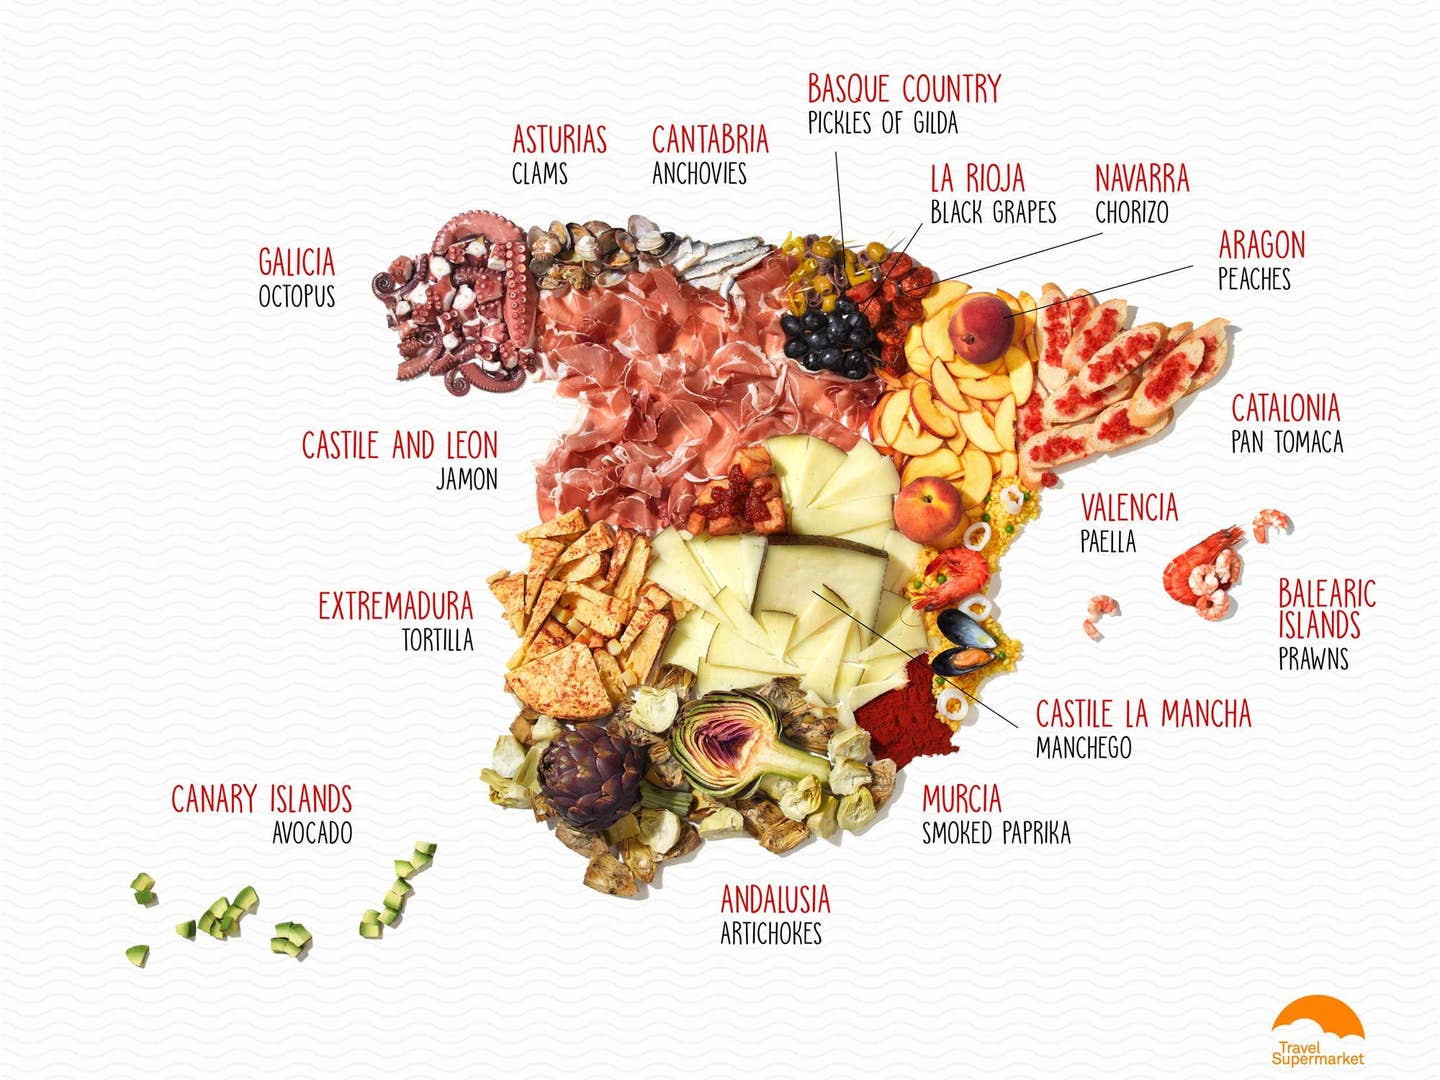 This Food Stylist Makes Maps Out of Regional Delicacies